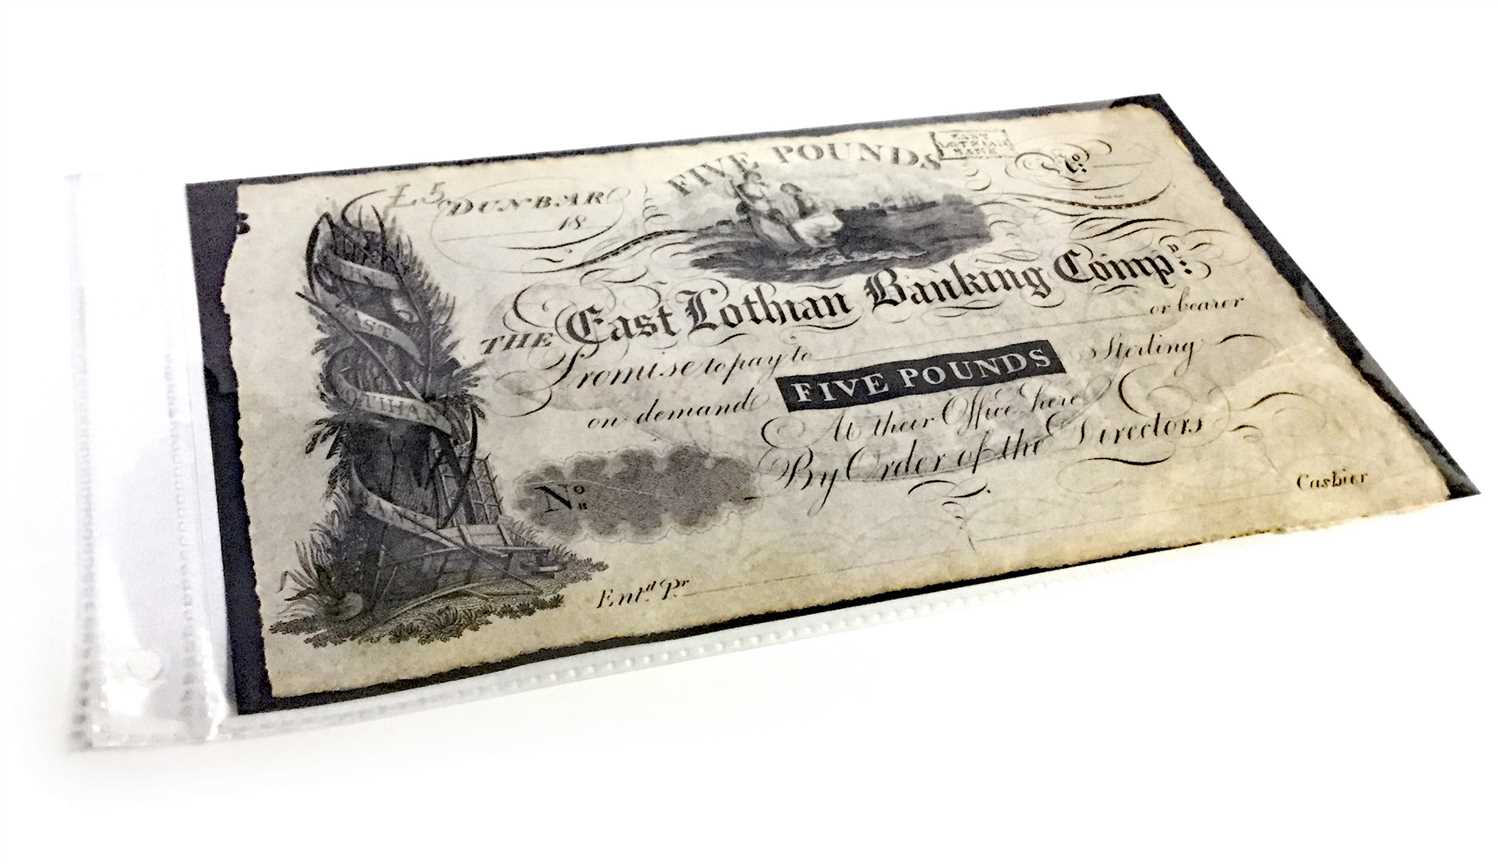 Lot 564 - AN EAST LOTHIAN BANKING COMPANY £5 NOTE, UNDATED